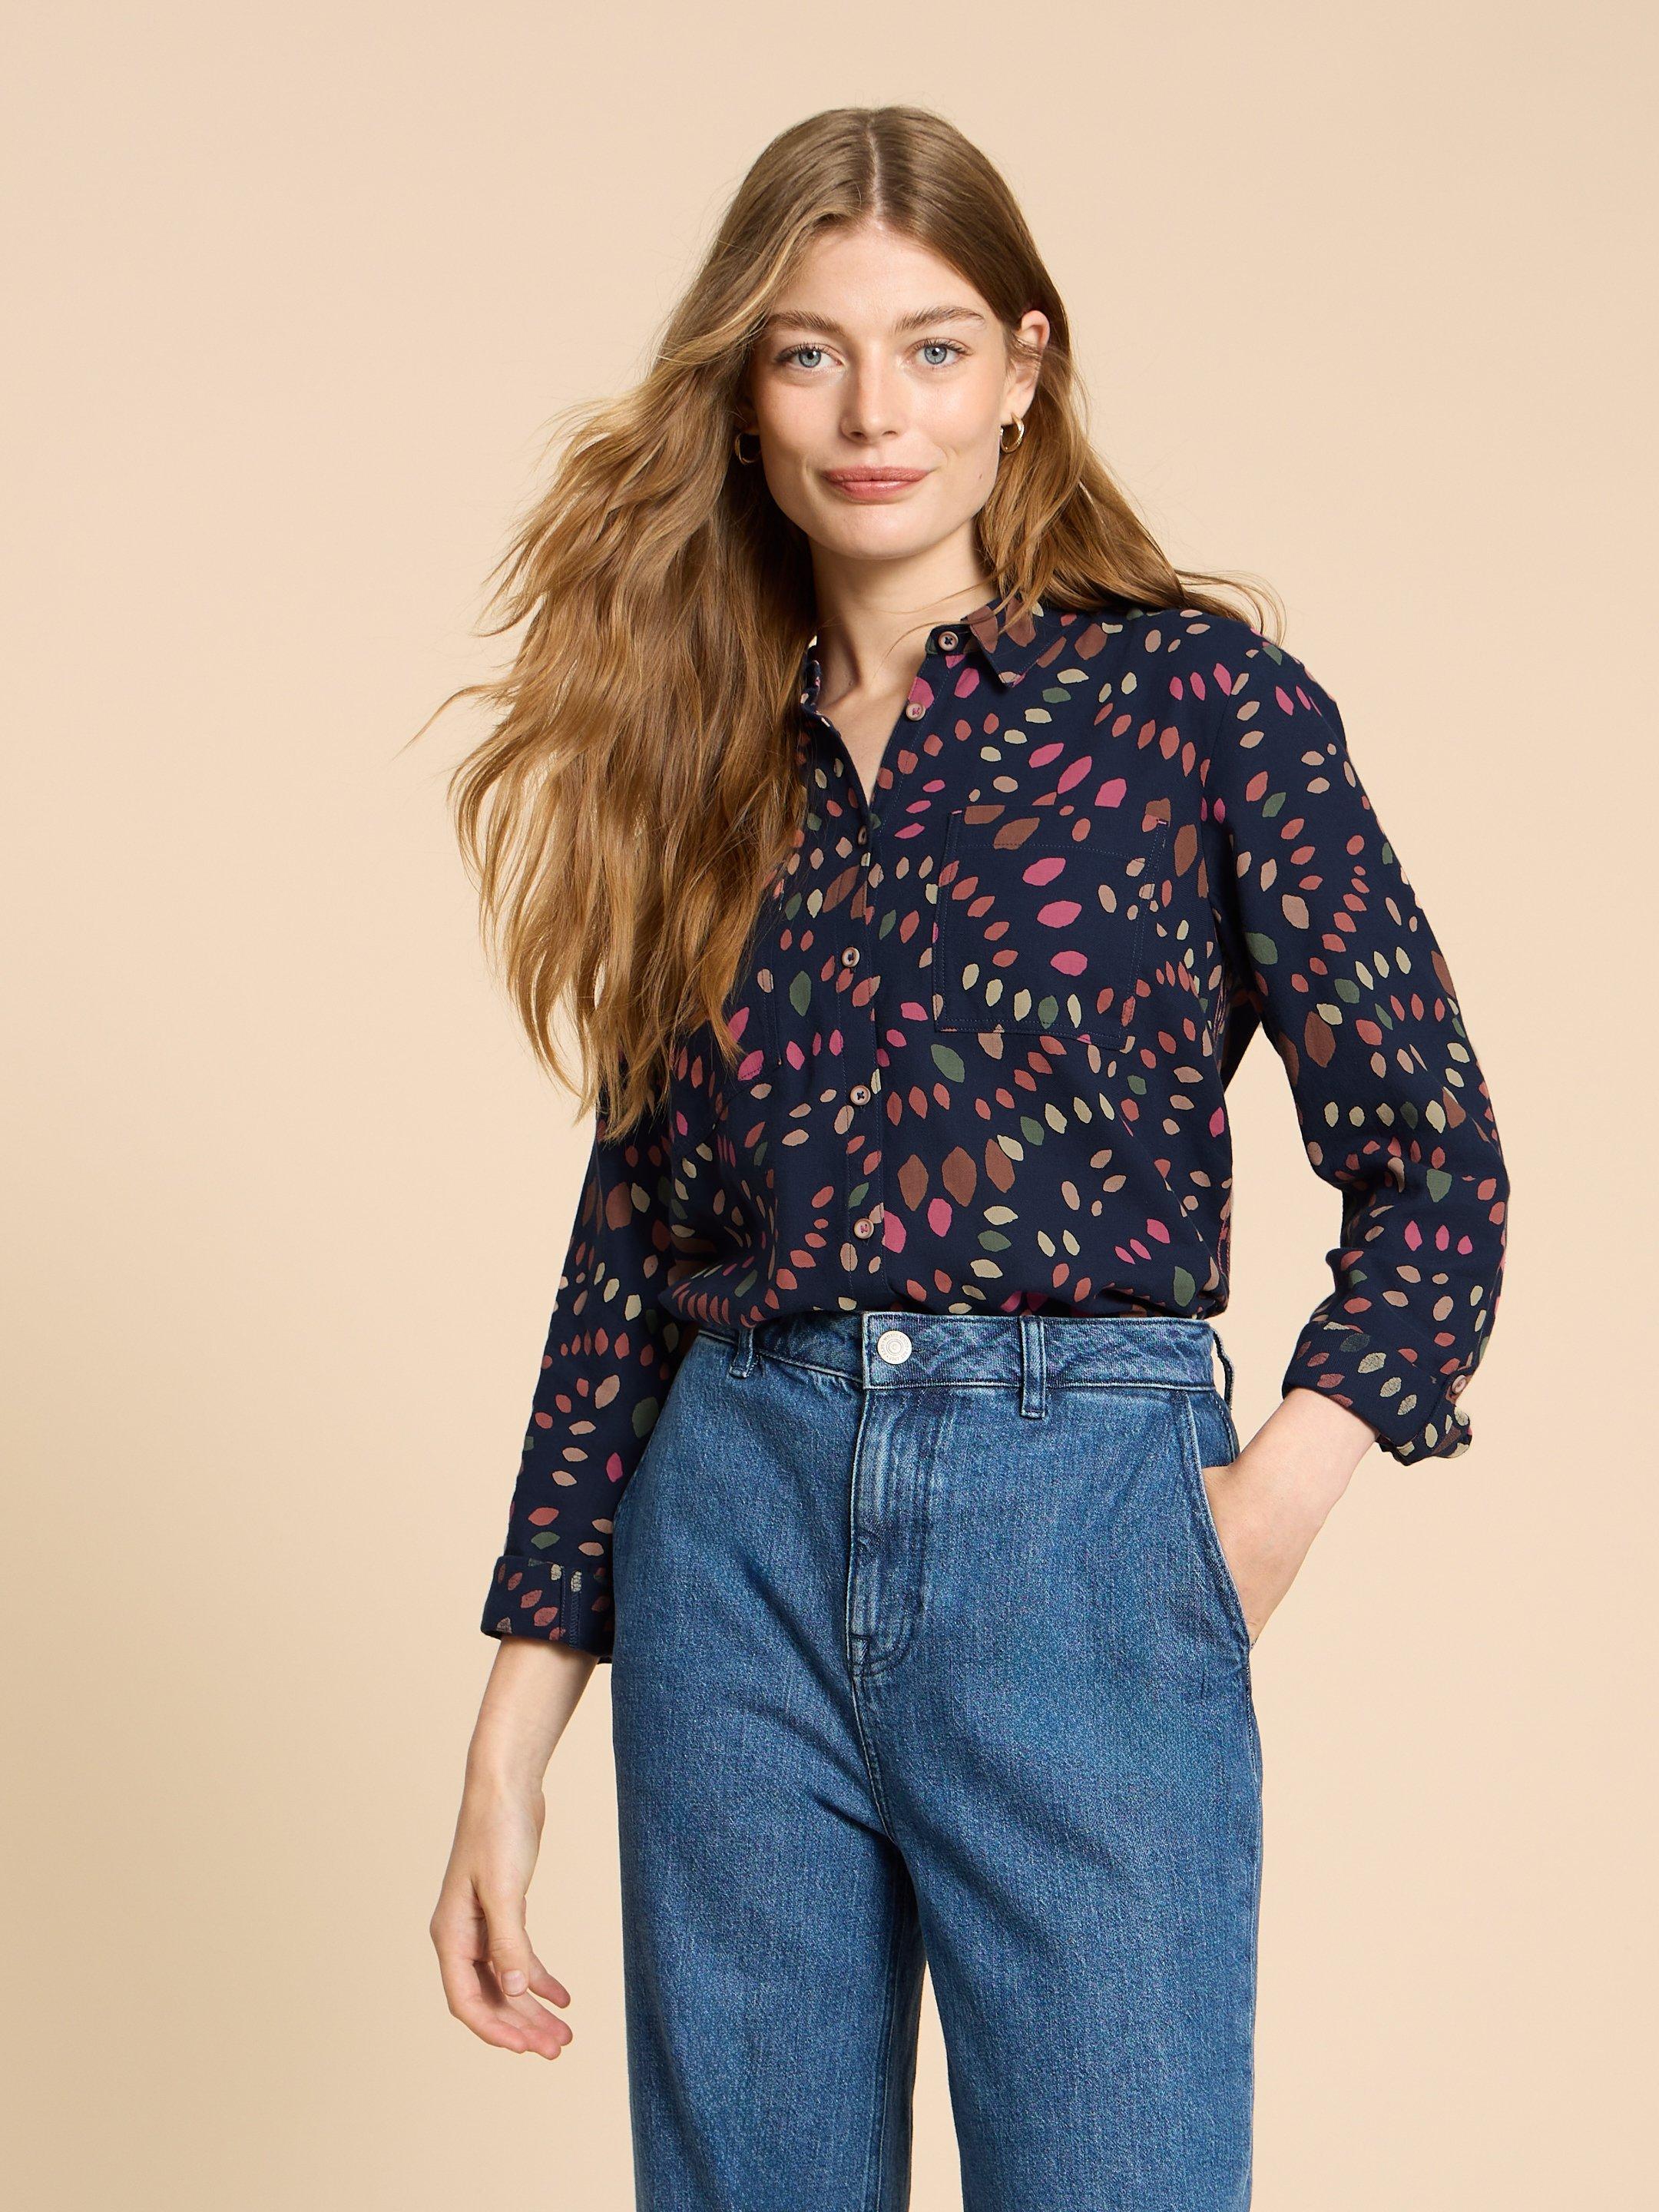 SOPHIE PRINTED ORGANIC SHIRT in NAVY MULTI - MODEL FRONT